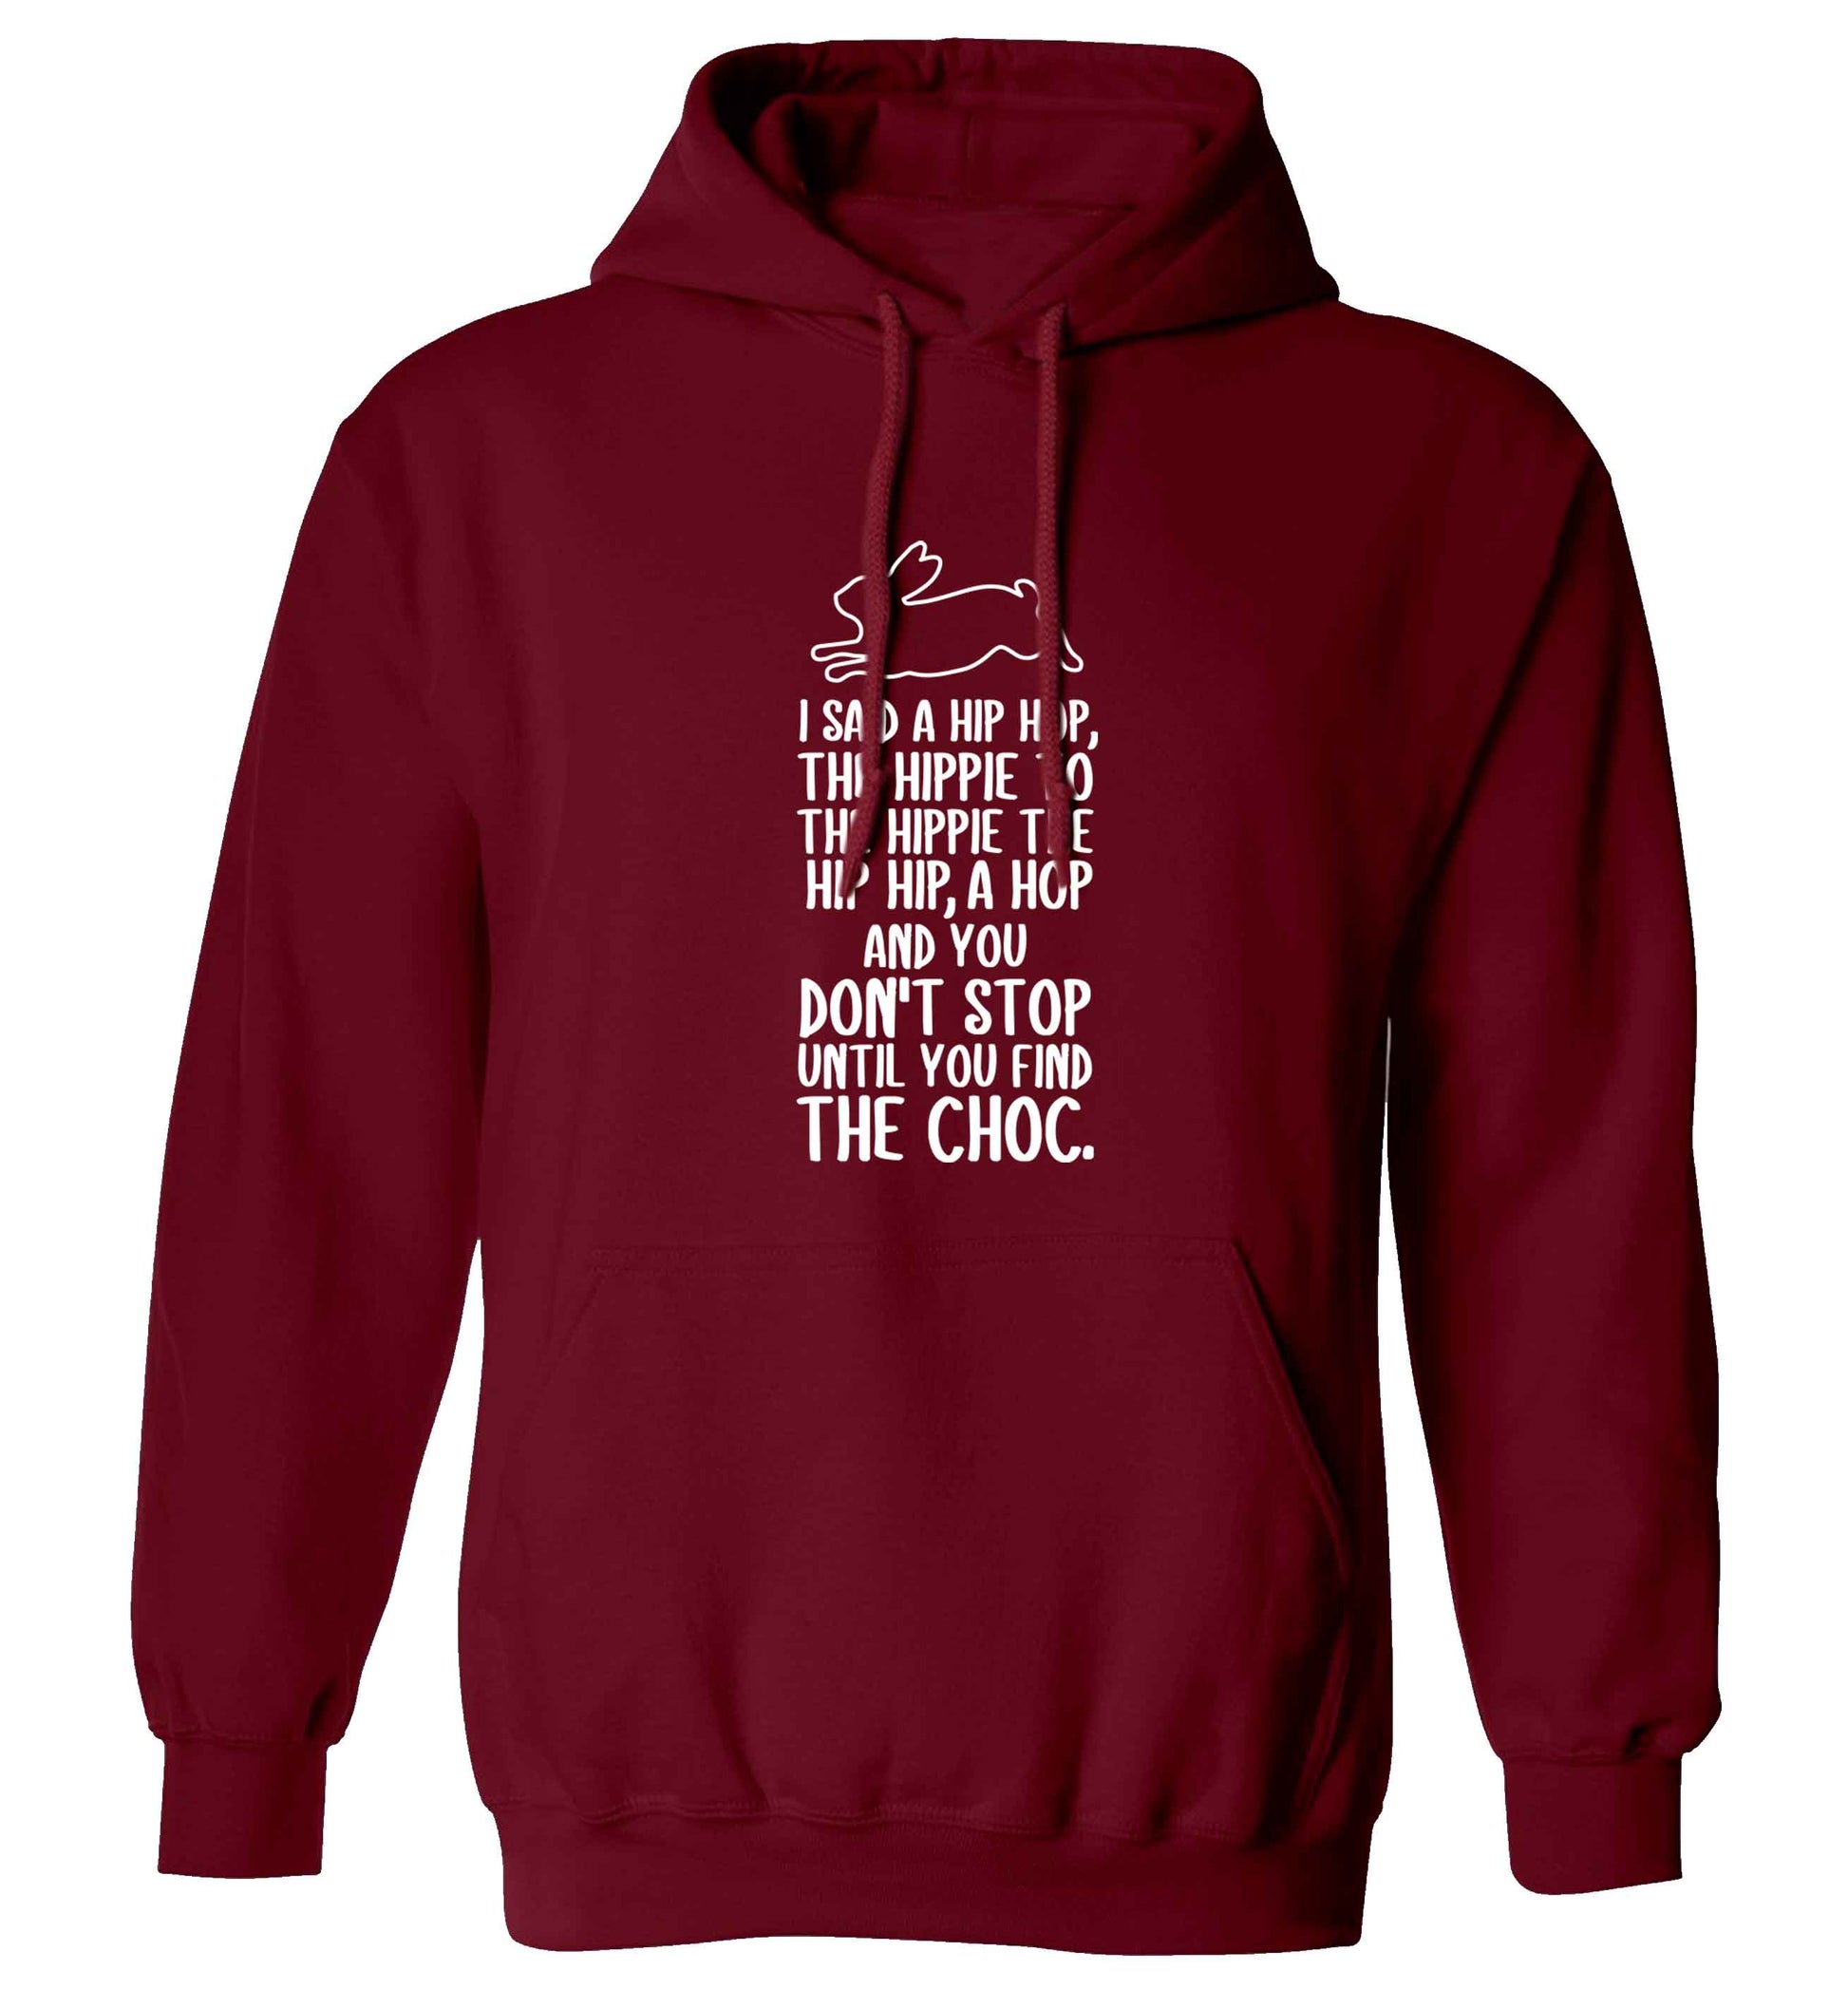 Don't stop until you find the choc adults unisex maroon hoodie 2XL